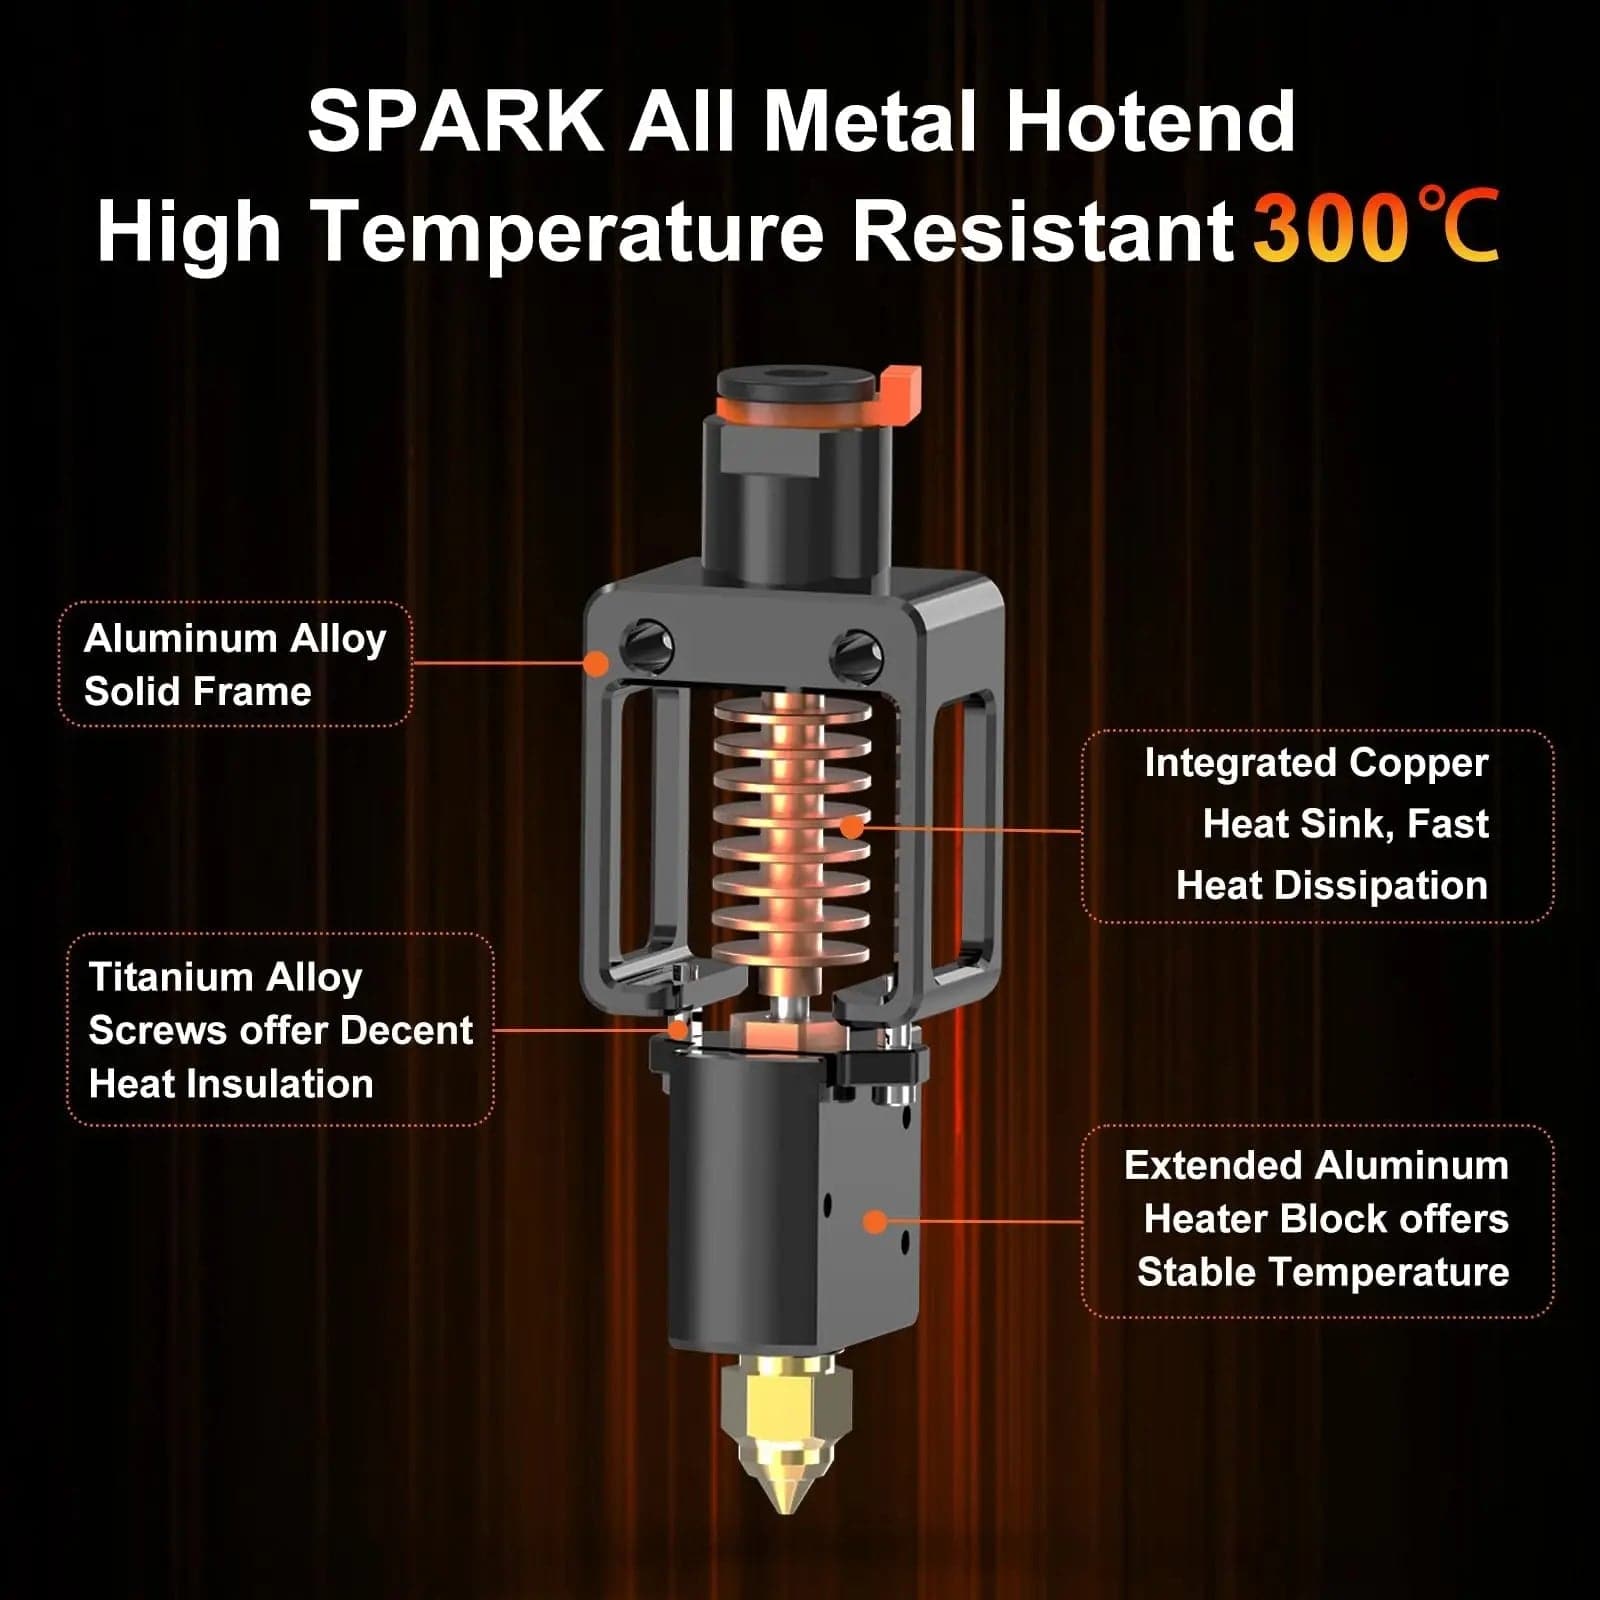 YOOPAI Spark All Metal Hotend, Supports 300℃ High Temperature High SpeFeatures:

【Ship From Amazon FBA Warehouse】Same shipping service with Amazon. Enjoy reliable performance and fast shipping with the Amazon FBA Warehouse.


【Ender 3 Metal Hotend, Supports 300℃ High Temperature High Speed Printing3D Printer Accessories